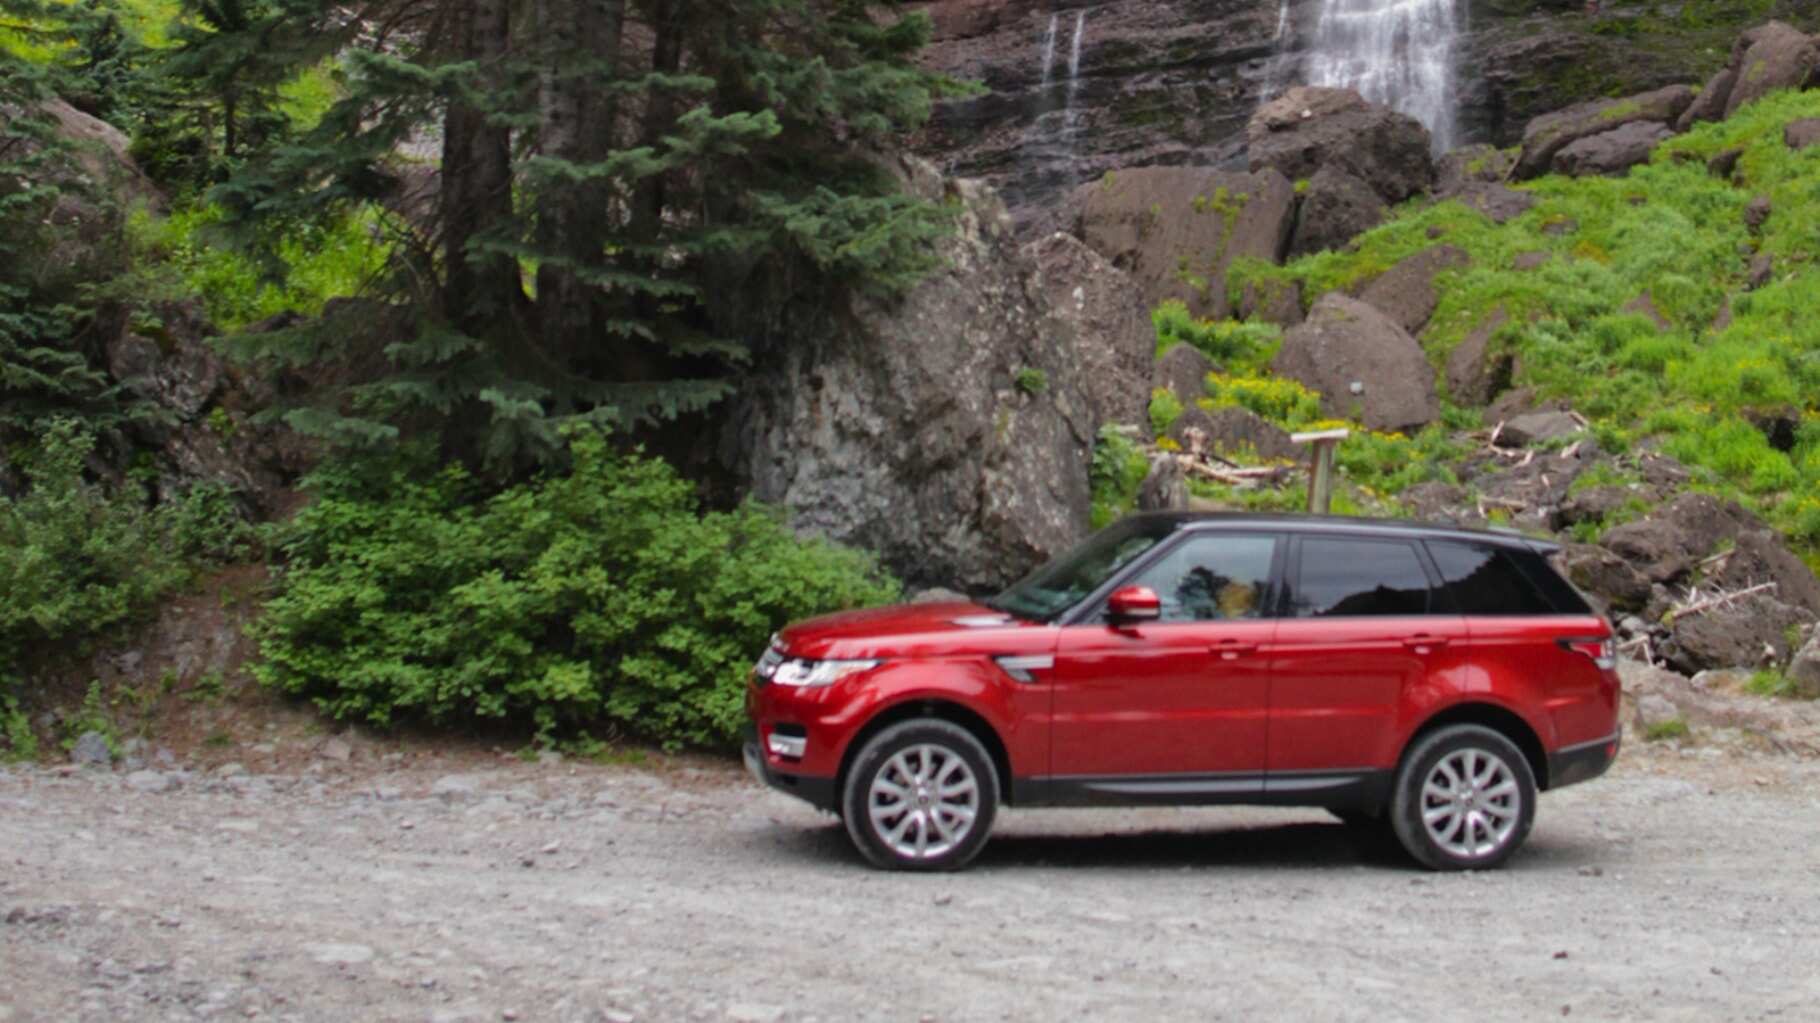 The Road Less Traveled | Land Rover US